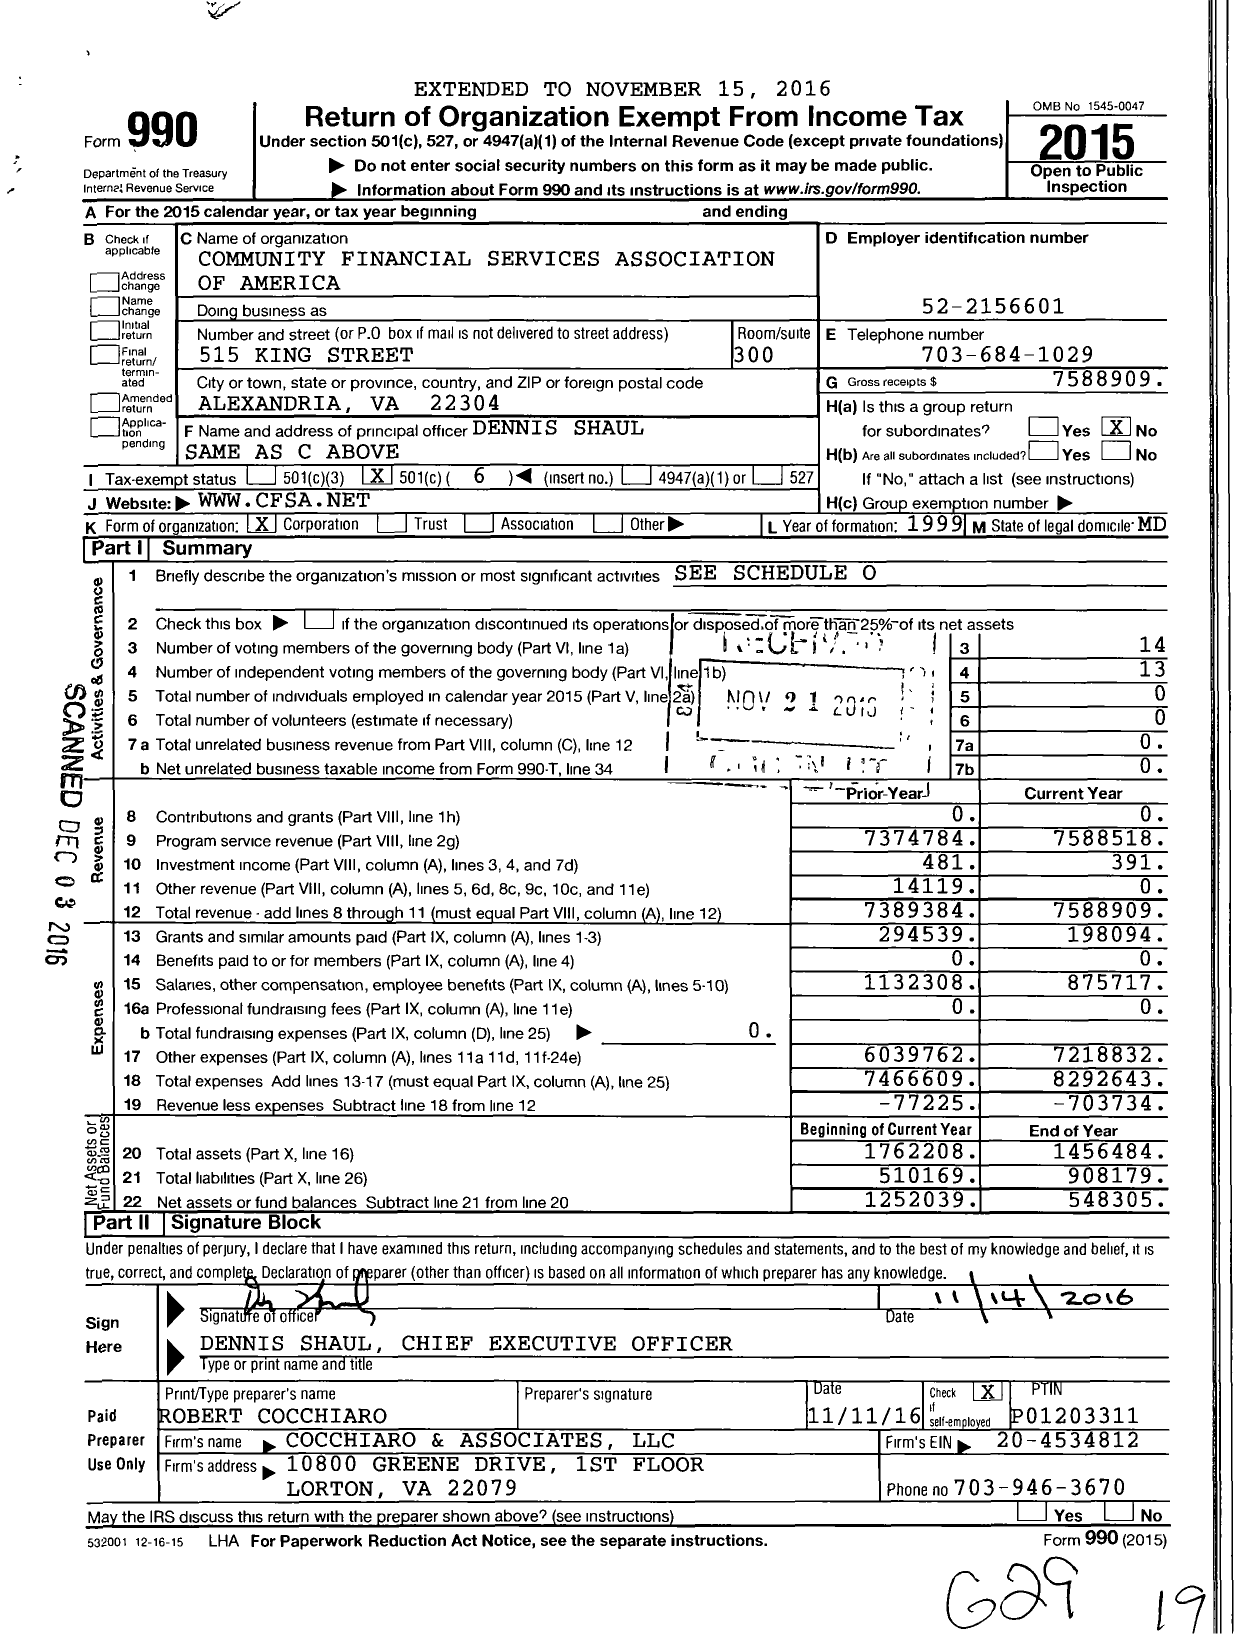 Image of first page of 2015 Form 990O for Community Financial Services Association (CFSA)